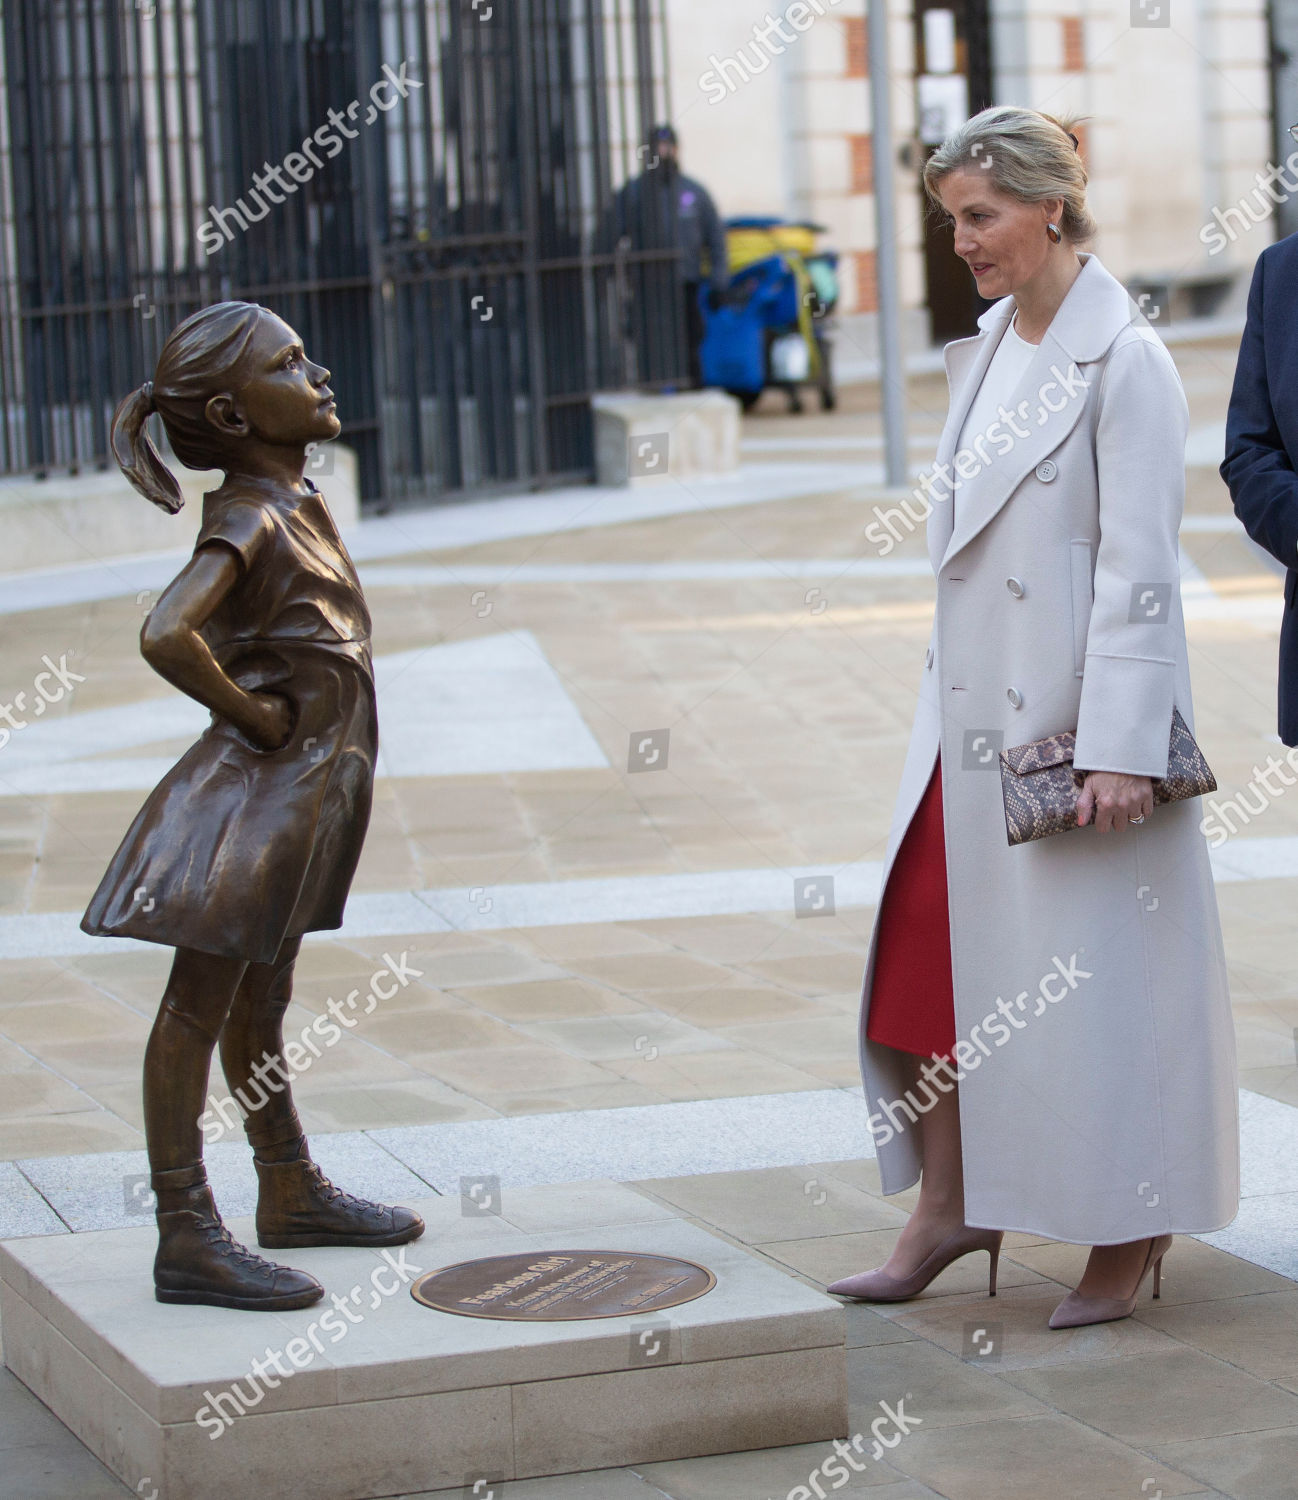 sophie-countess-of-wessex-attends-womens-network-forum-and-market-opening-ceremony-international-womens-day-london-uk-08-mar-2019-shutterstock-editorial-10147941o.jpg